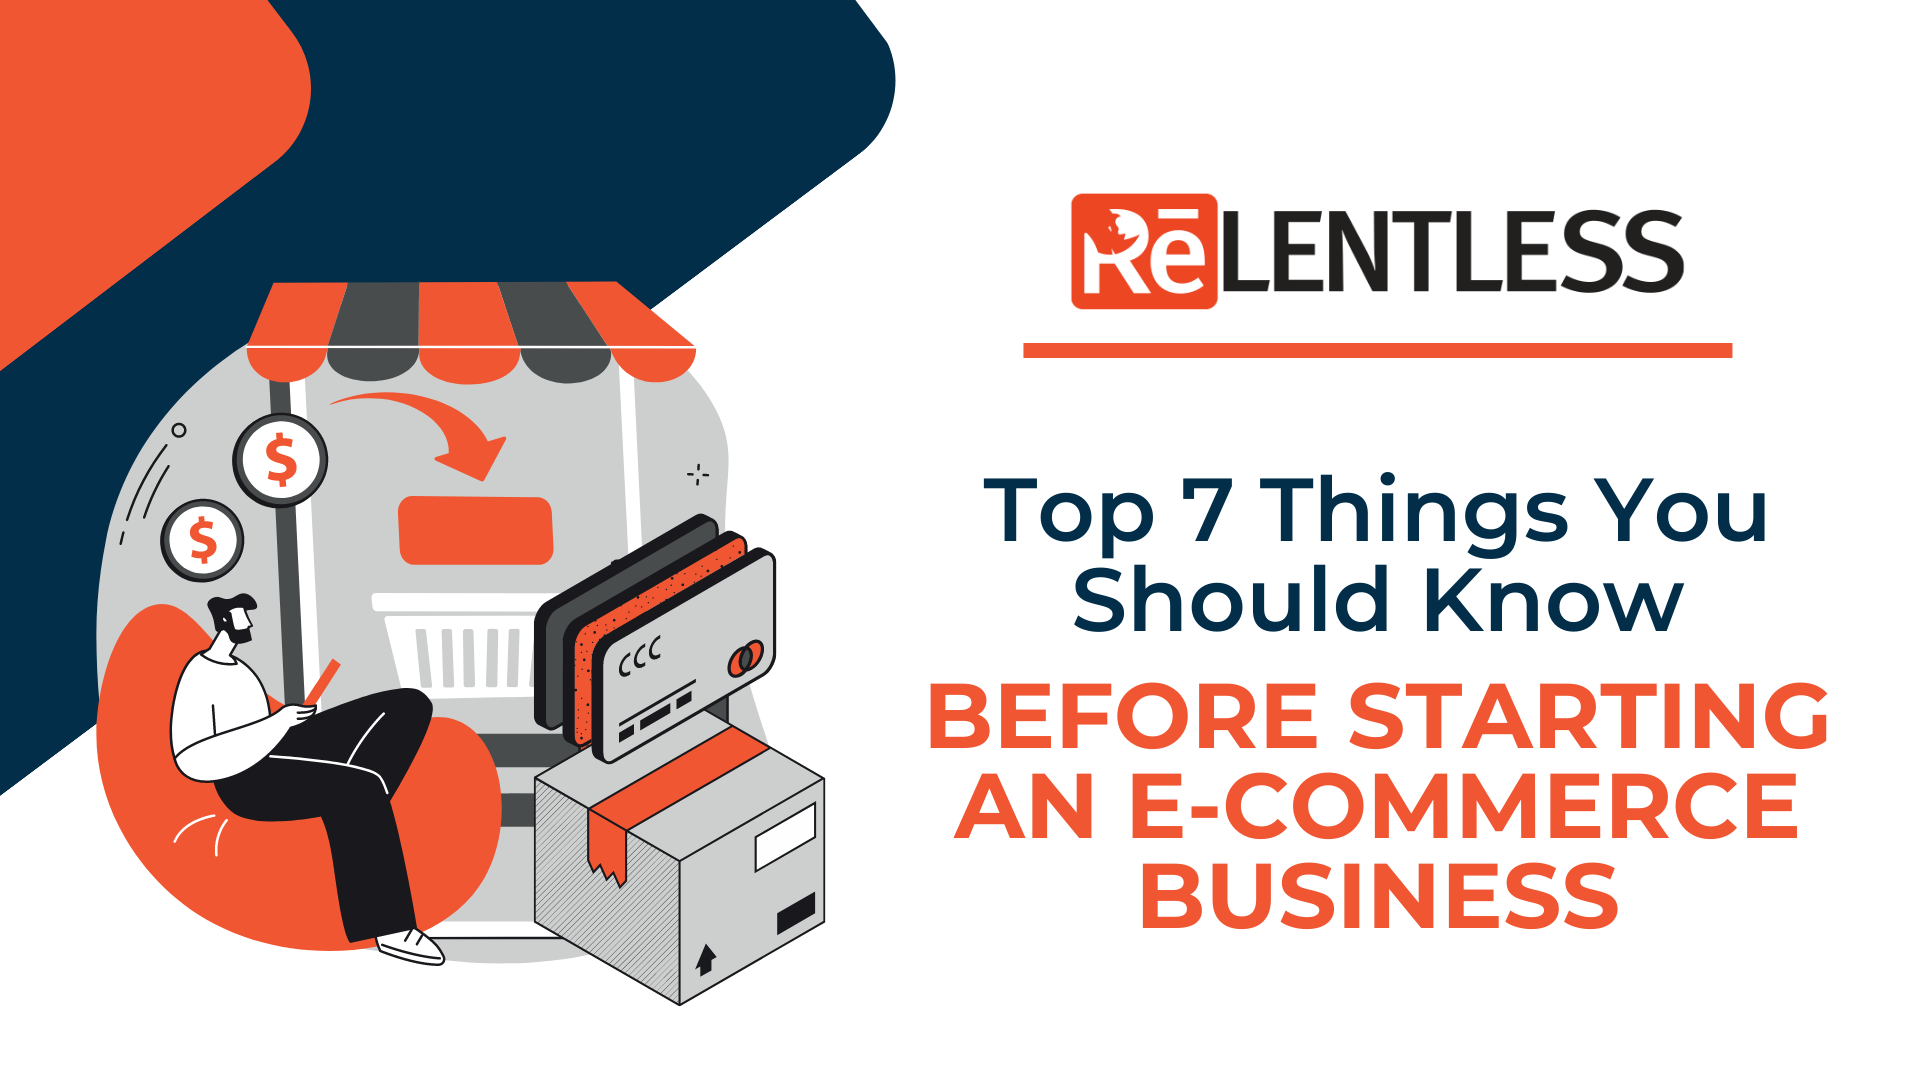 Top 7 Things You Should Know Before Starting an E-Commerce Business